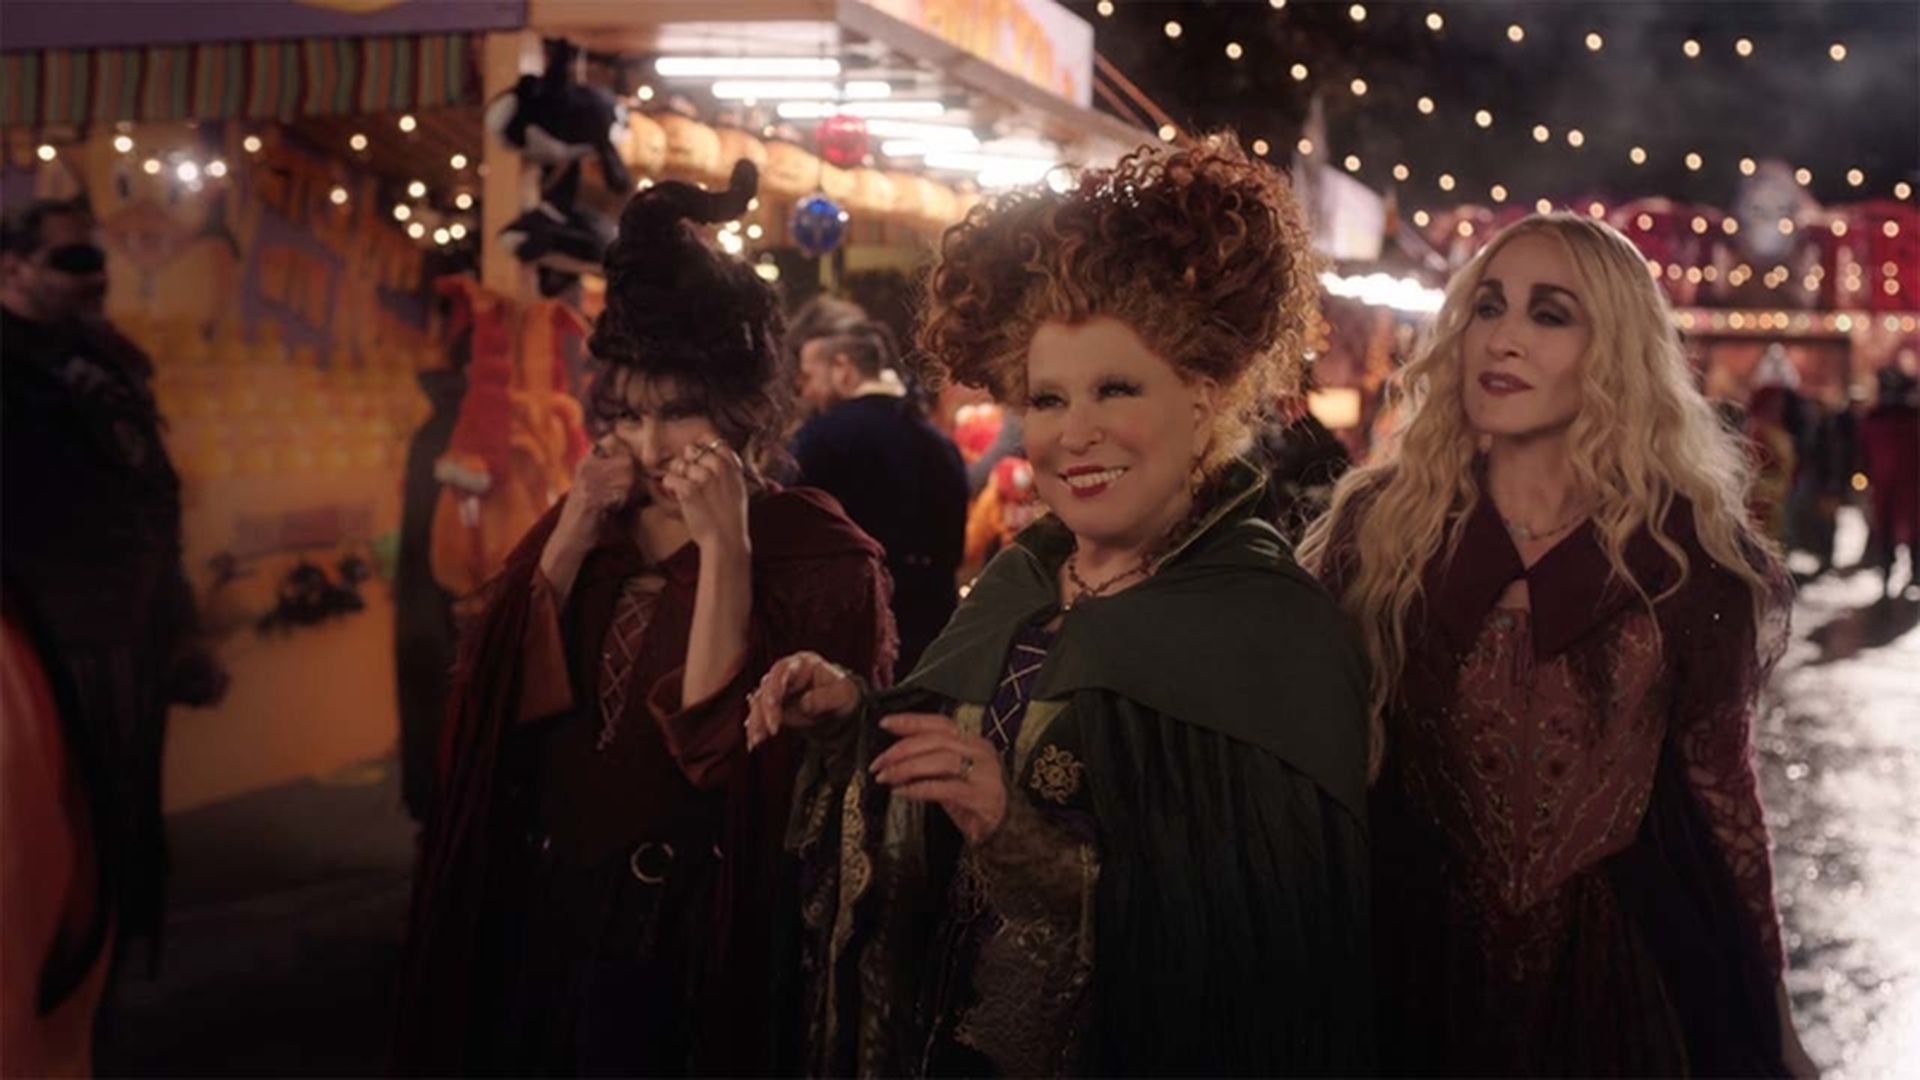 In this article, we are going to cover the Disney Plus Hocus Pocus 2 trailer, release date, and cast, so you know all there is to it about the upcoming movie.